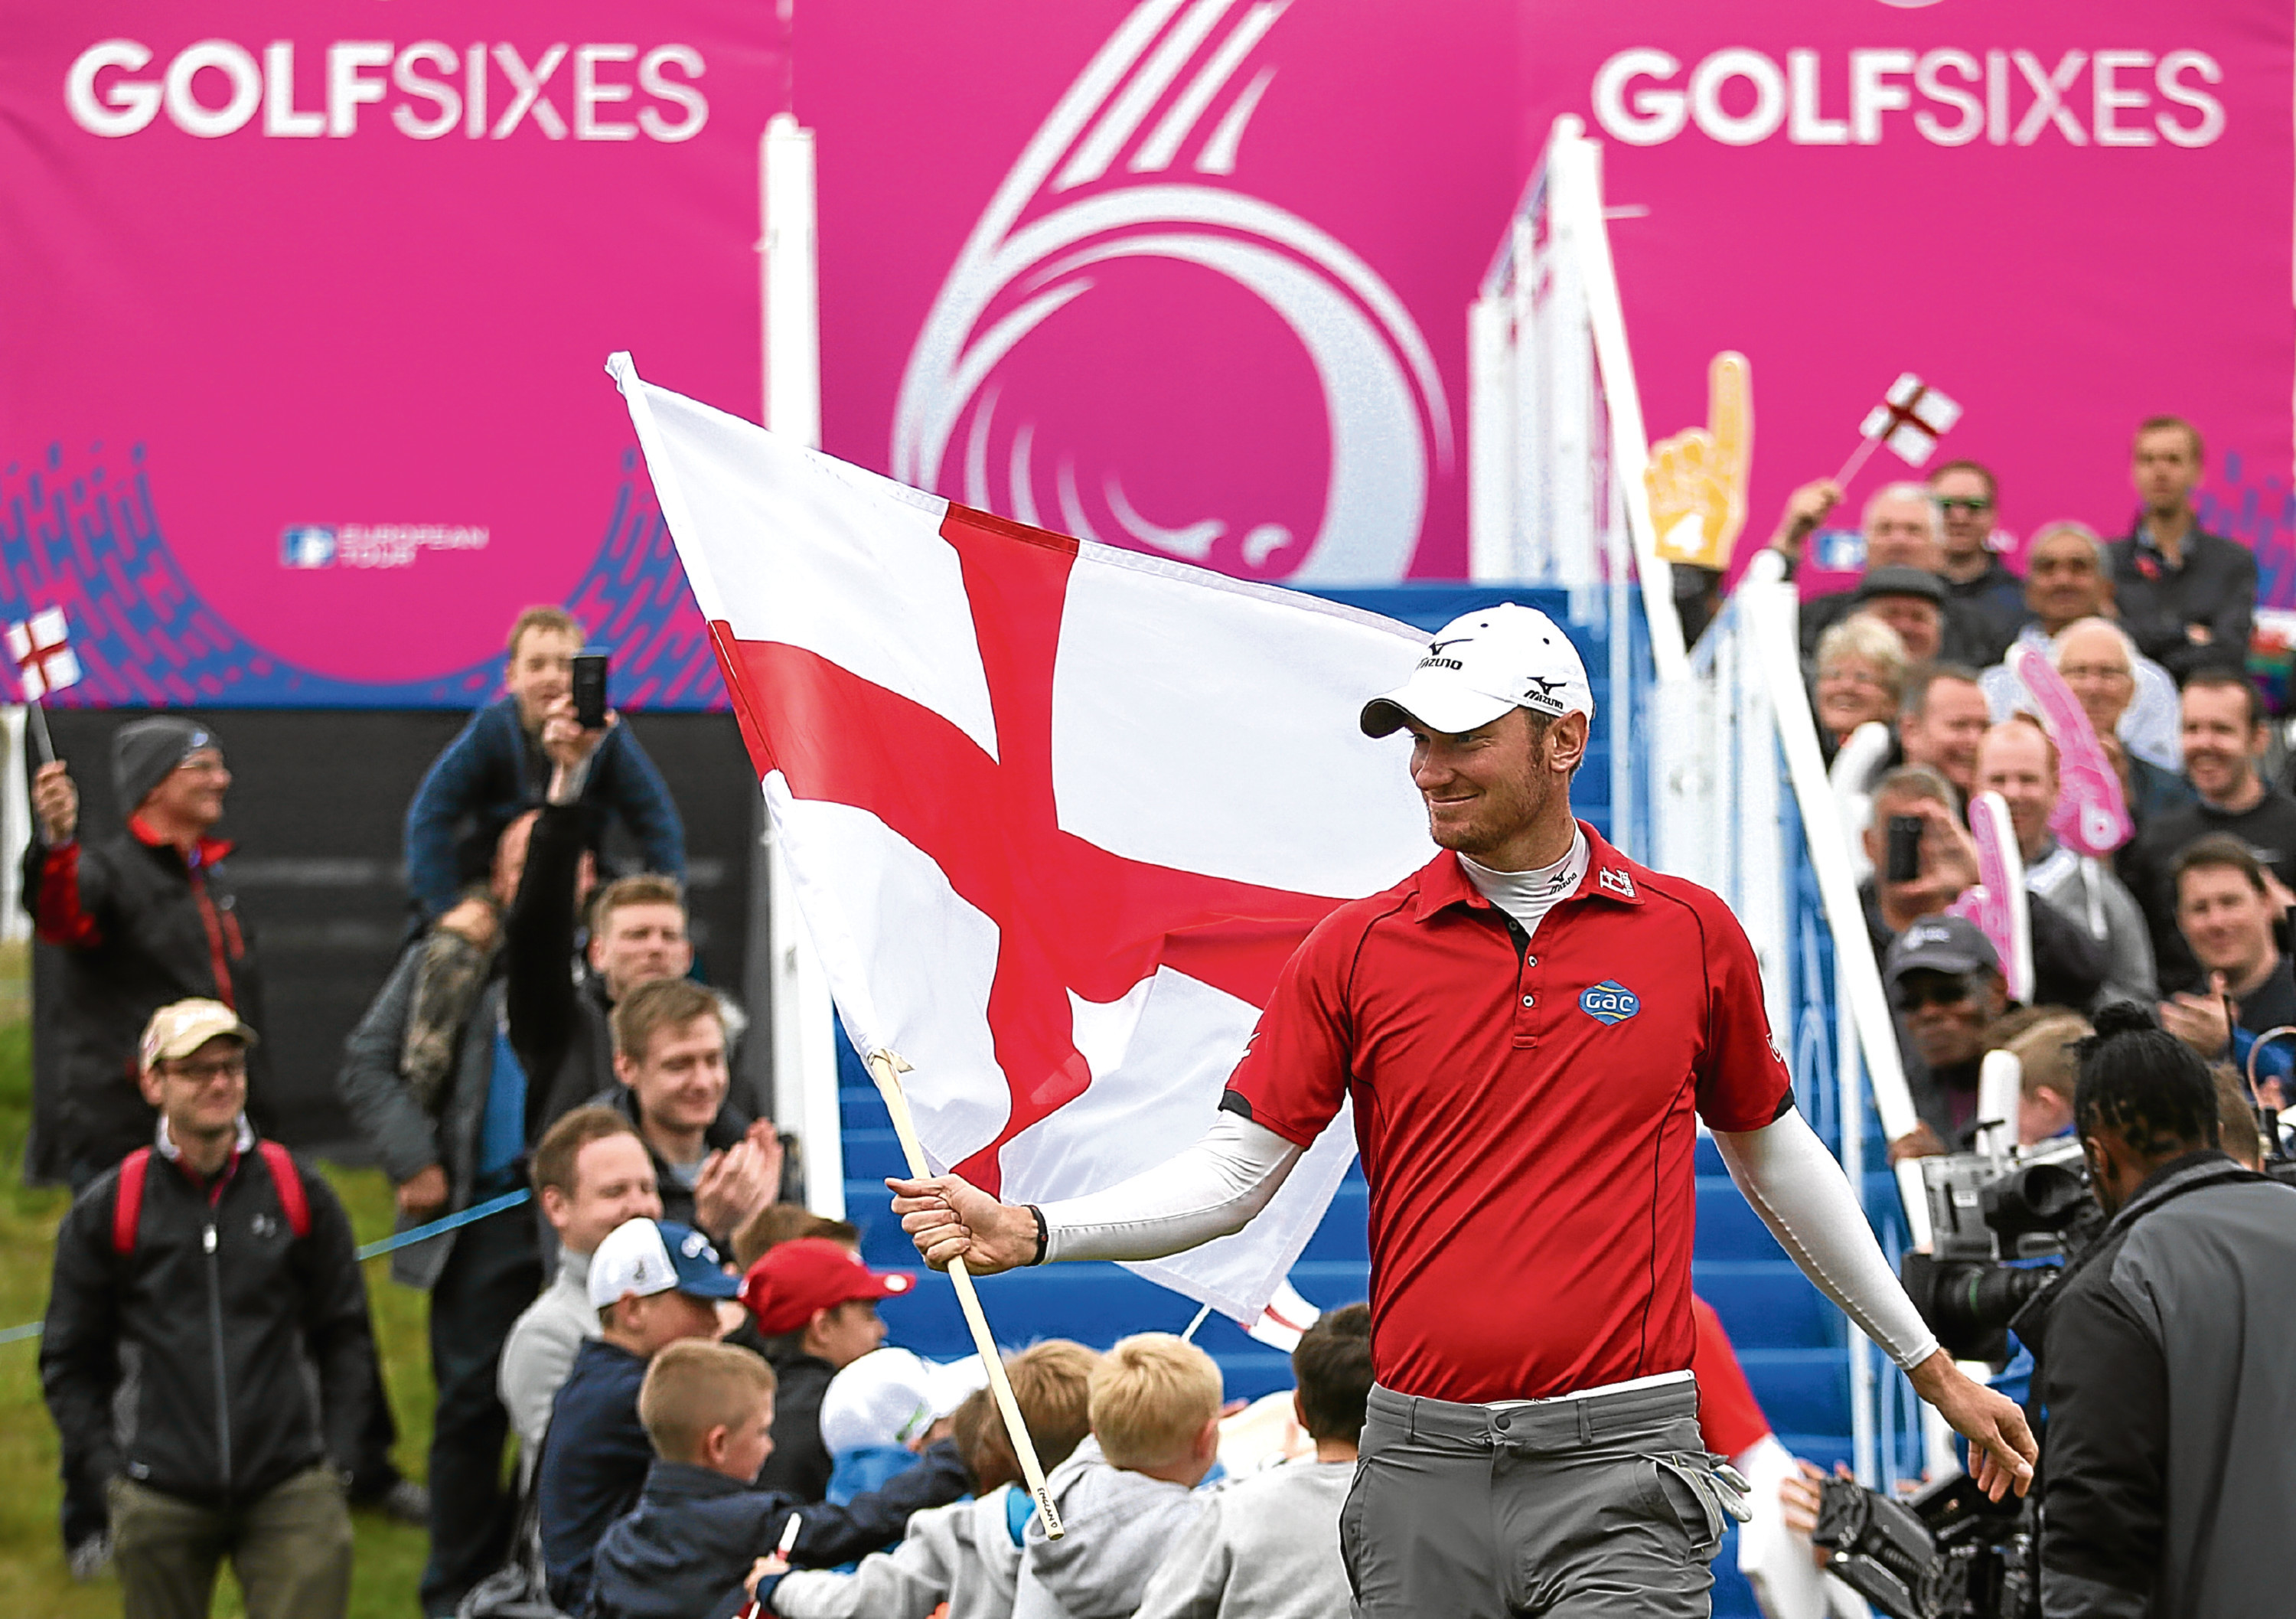 England's Chris Wood and Andy Sullivan make their entrance on the 1st hole during day one of the Golf Sixes at the Centurion Club, St Albans.